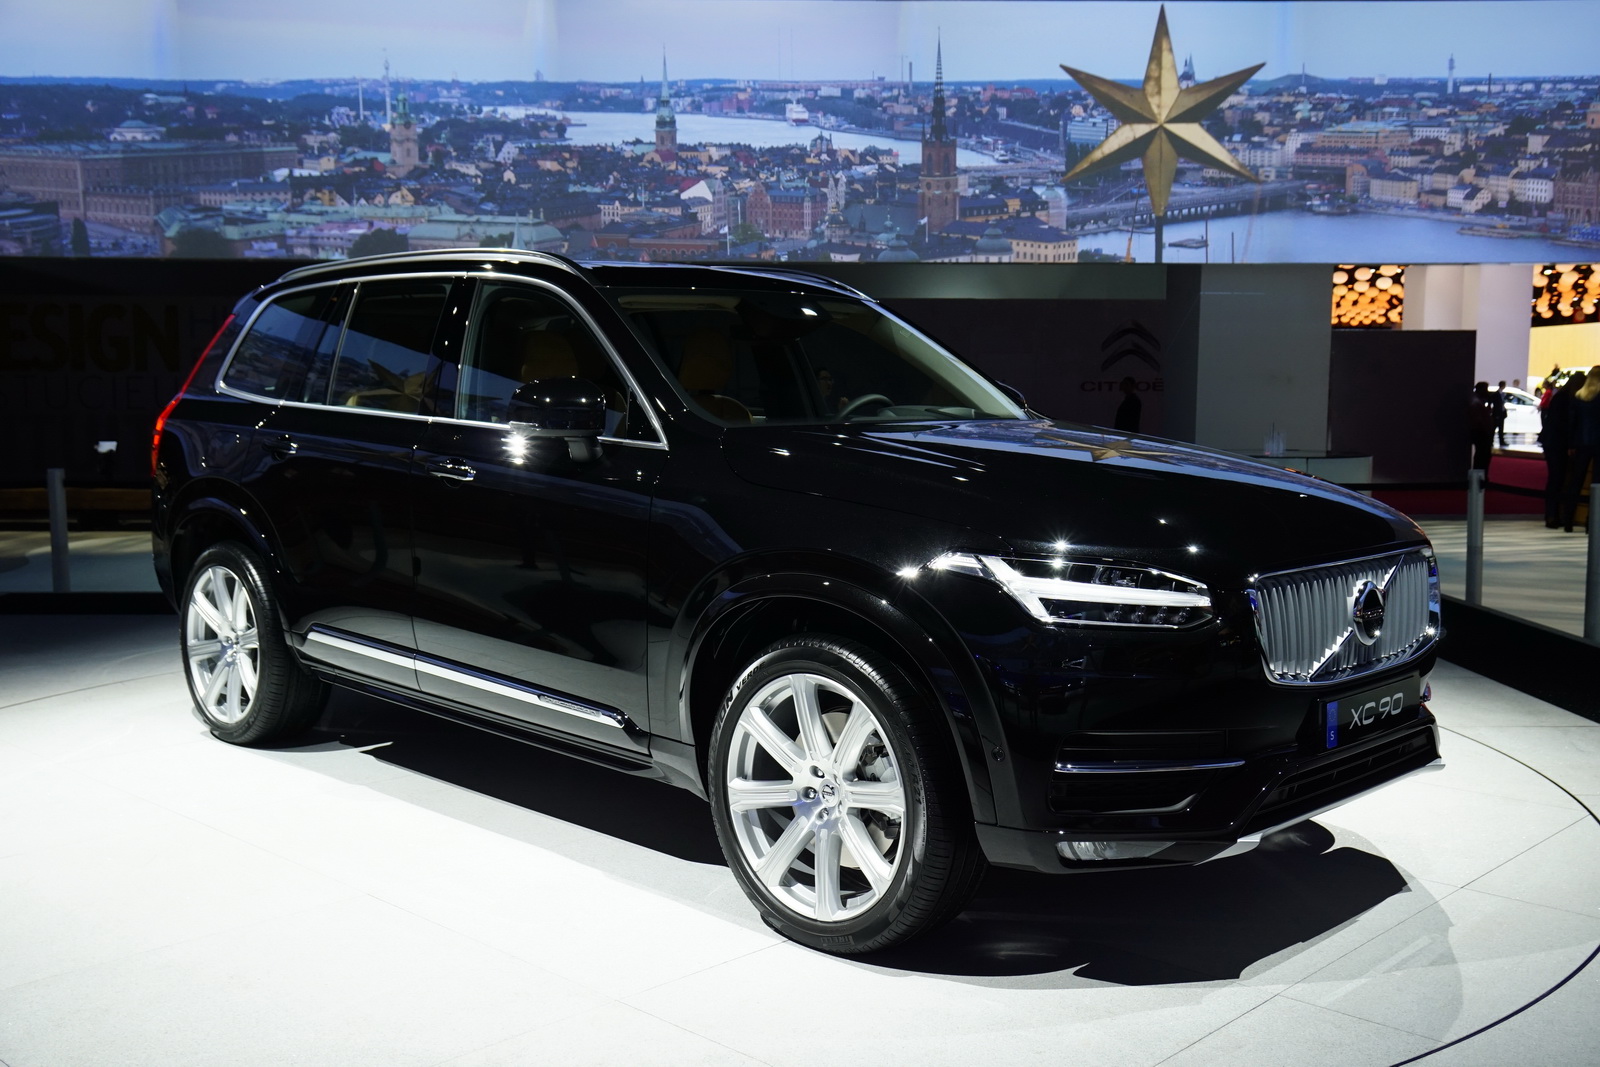 Check out the New Volvo XC90 in All its Glory at Paris Auto Show